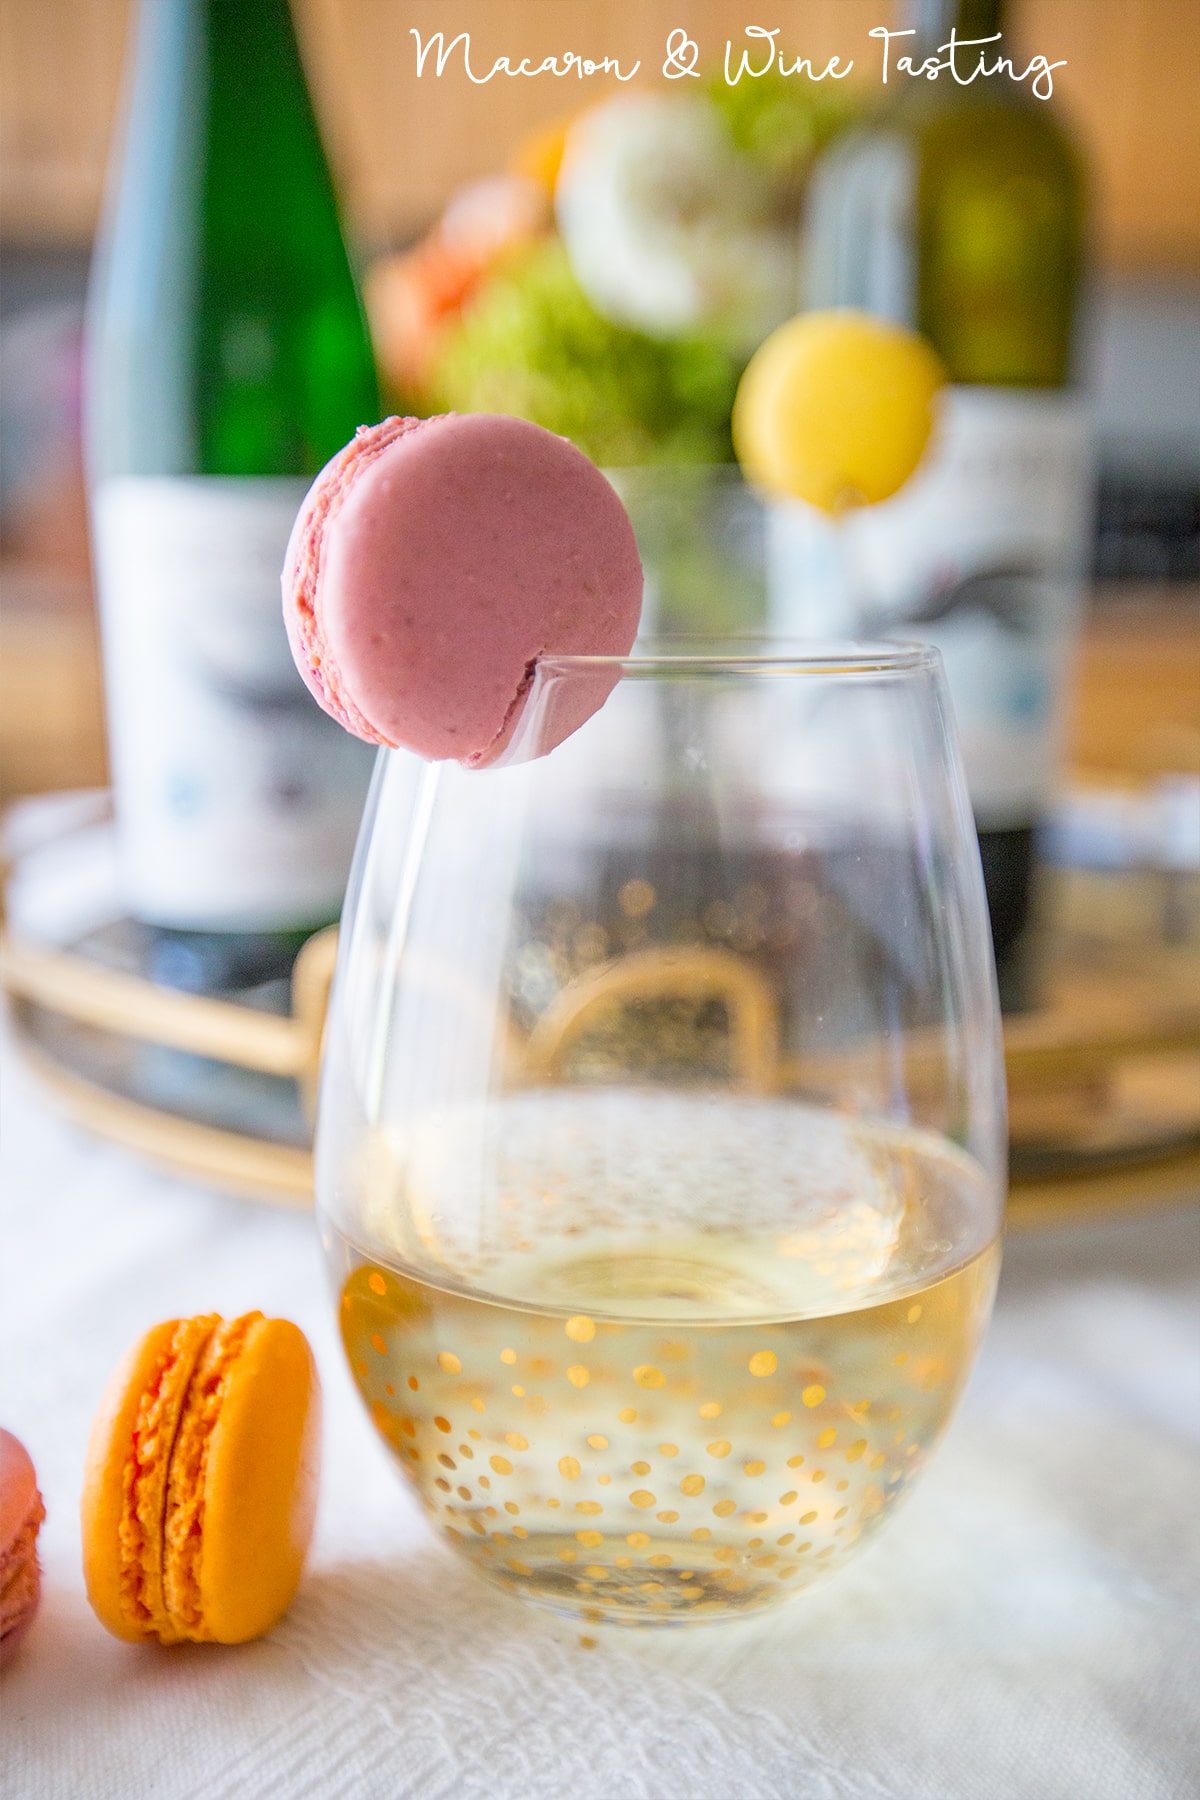 Macaron and Wine Tasting party- so delicious! Love this idea!